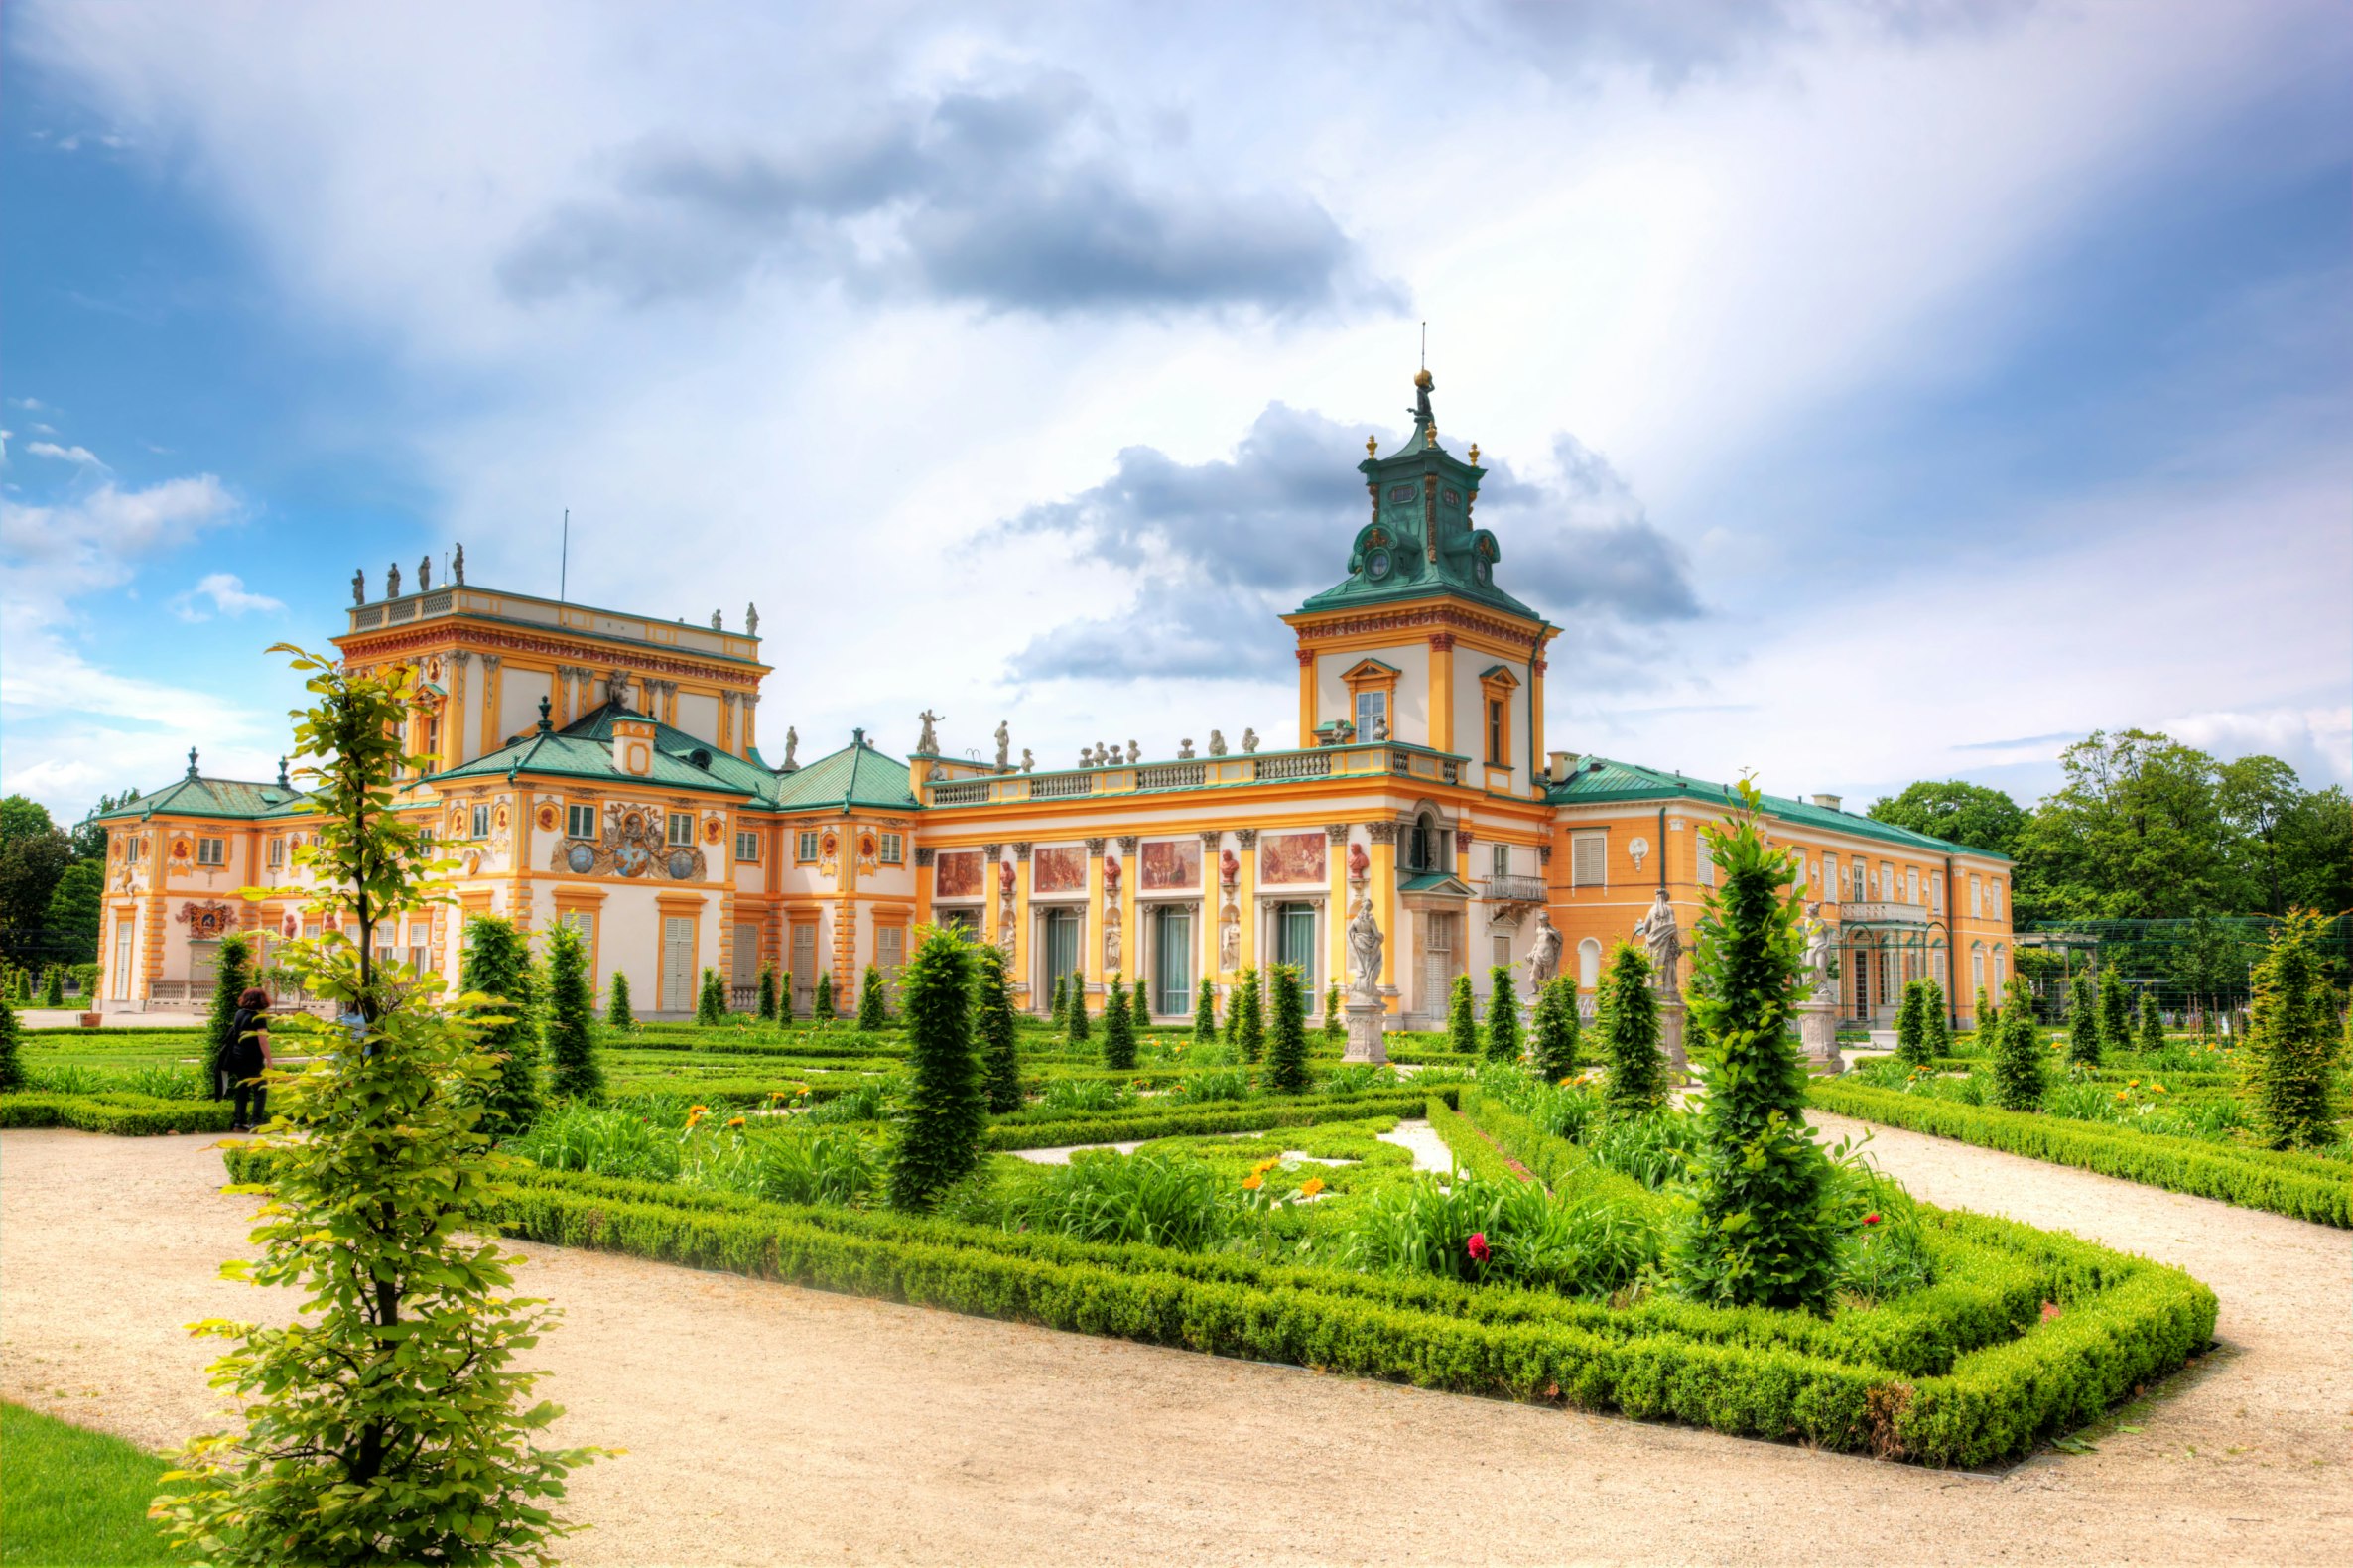 500px Photo ID: 96483849 - The royal Wilanow Palace in Warsaw, Poland. View from Upper Garden